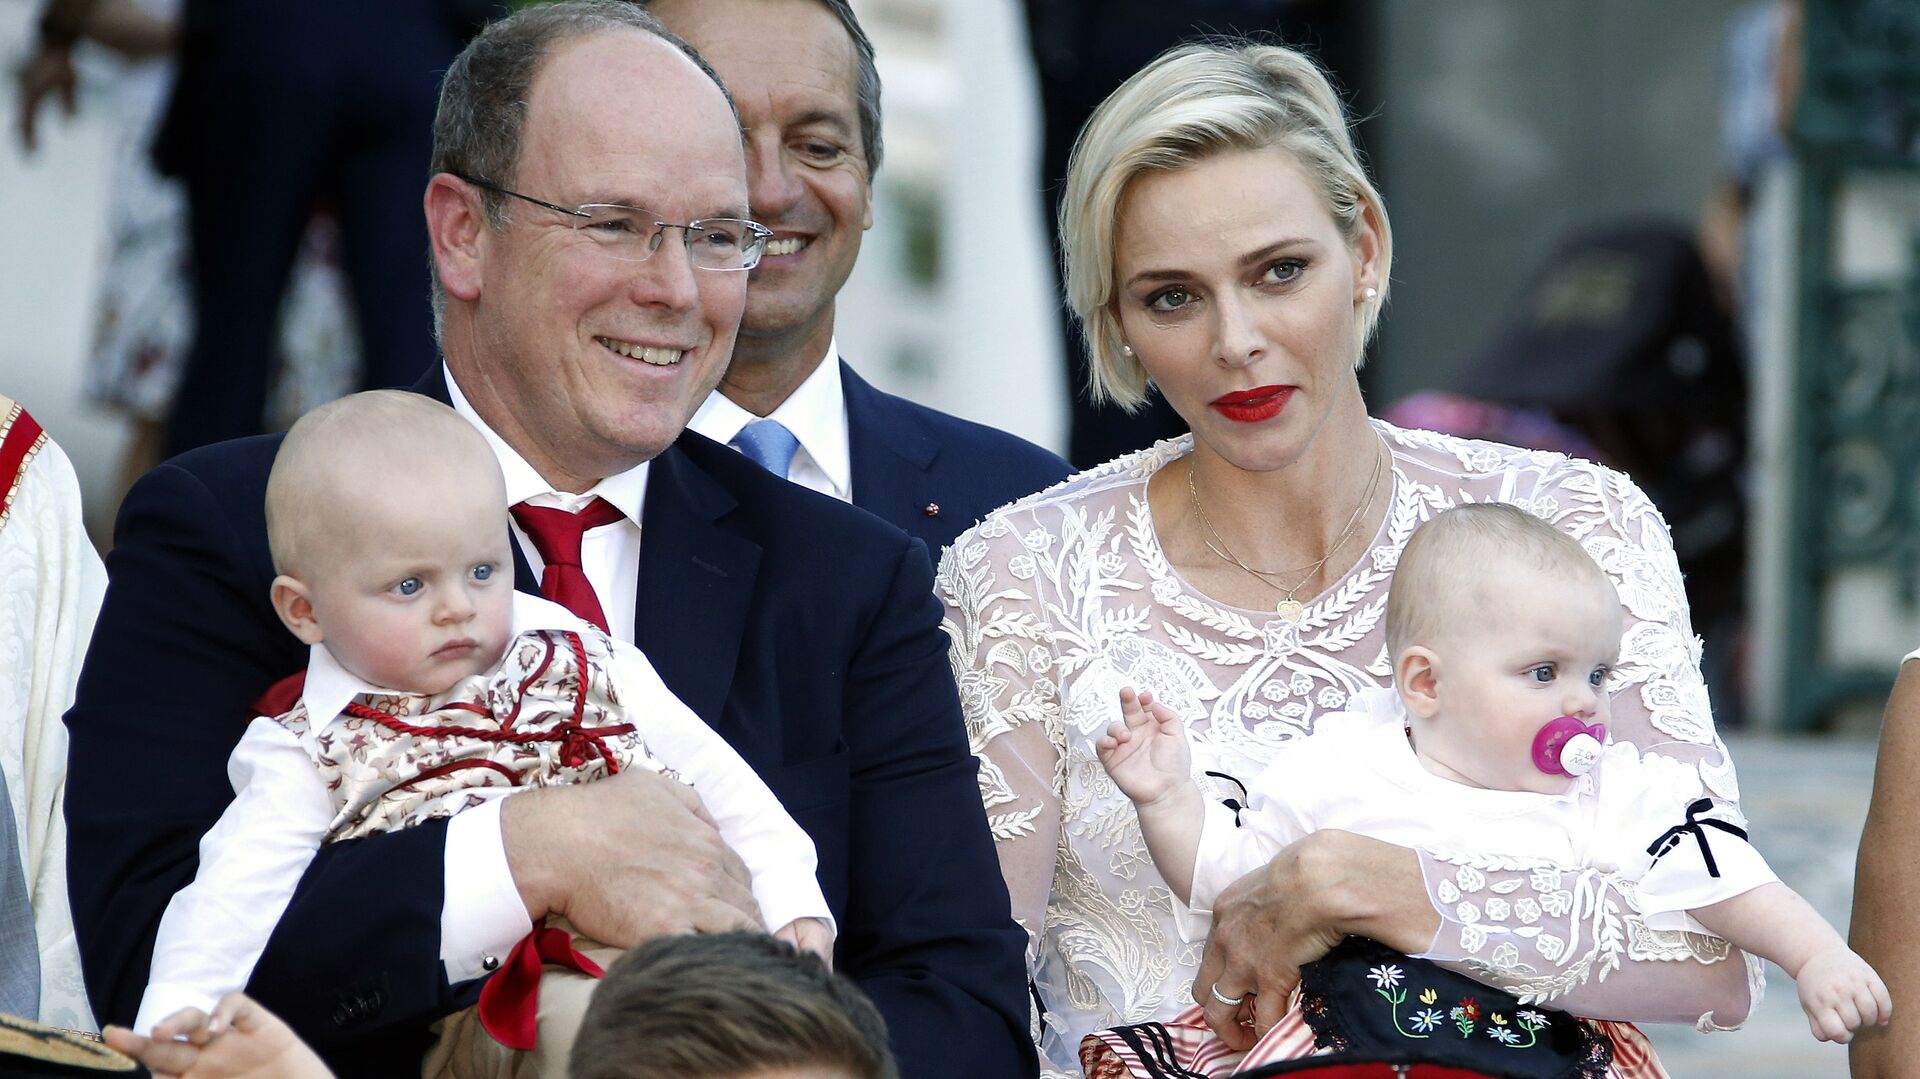 Prince Albert II and his wife Princess Charlene of Monaco arrive with their twins, Prince Jacques and Princess Gabriella, to take part in the traditional Pique Nique Monegasque (Monaco's picnic) in Monaco August 28, 2015. - Sputnik International, 1920, 09.09.2021